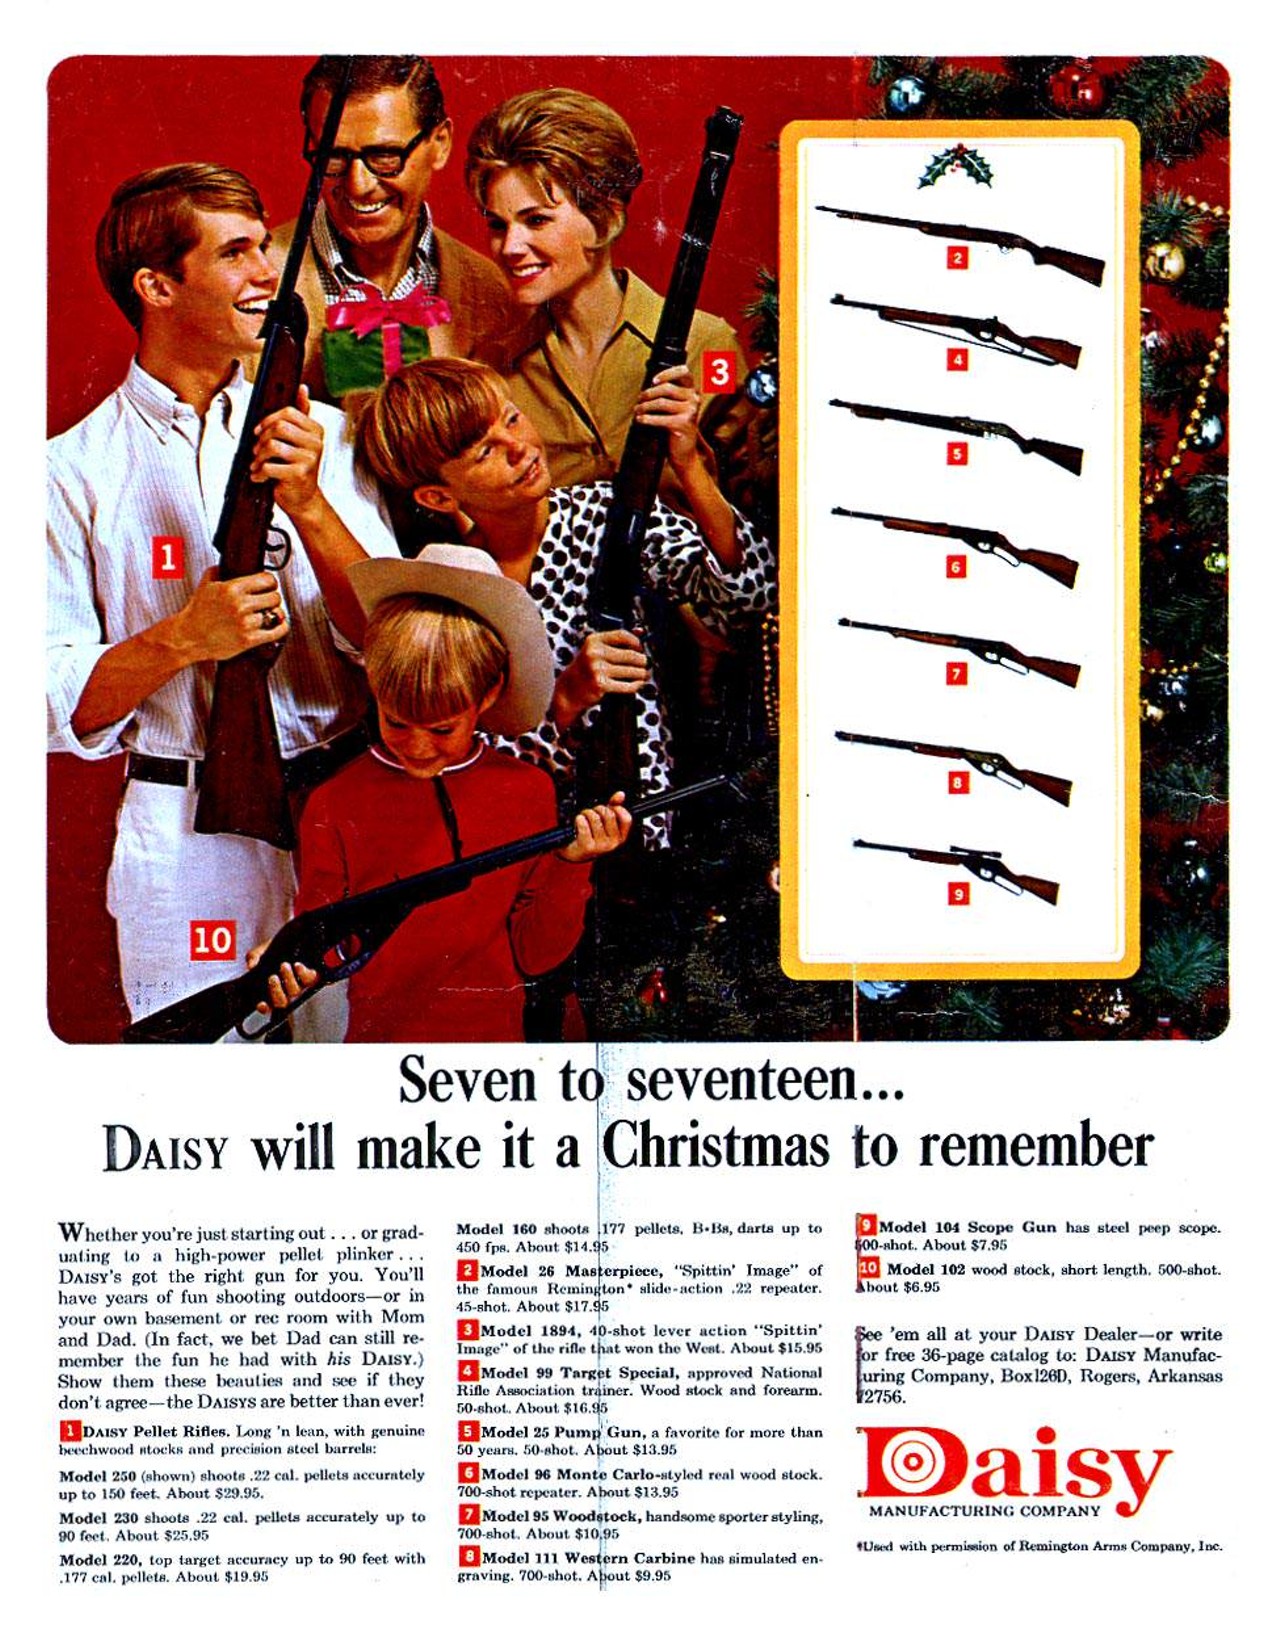 Daisy gun holiday ad, date not listed (Photo via Flickr Creative Commons, Werner Presber)